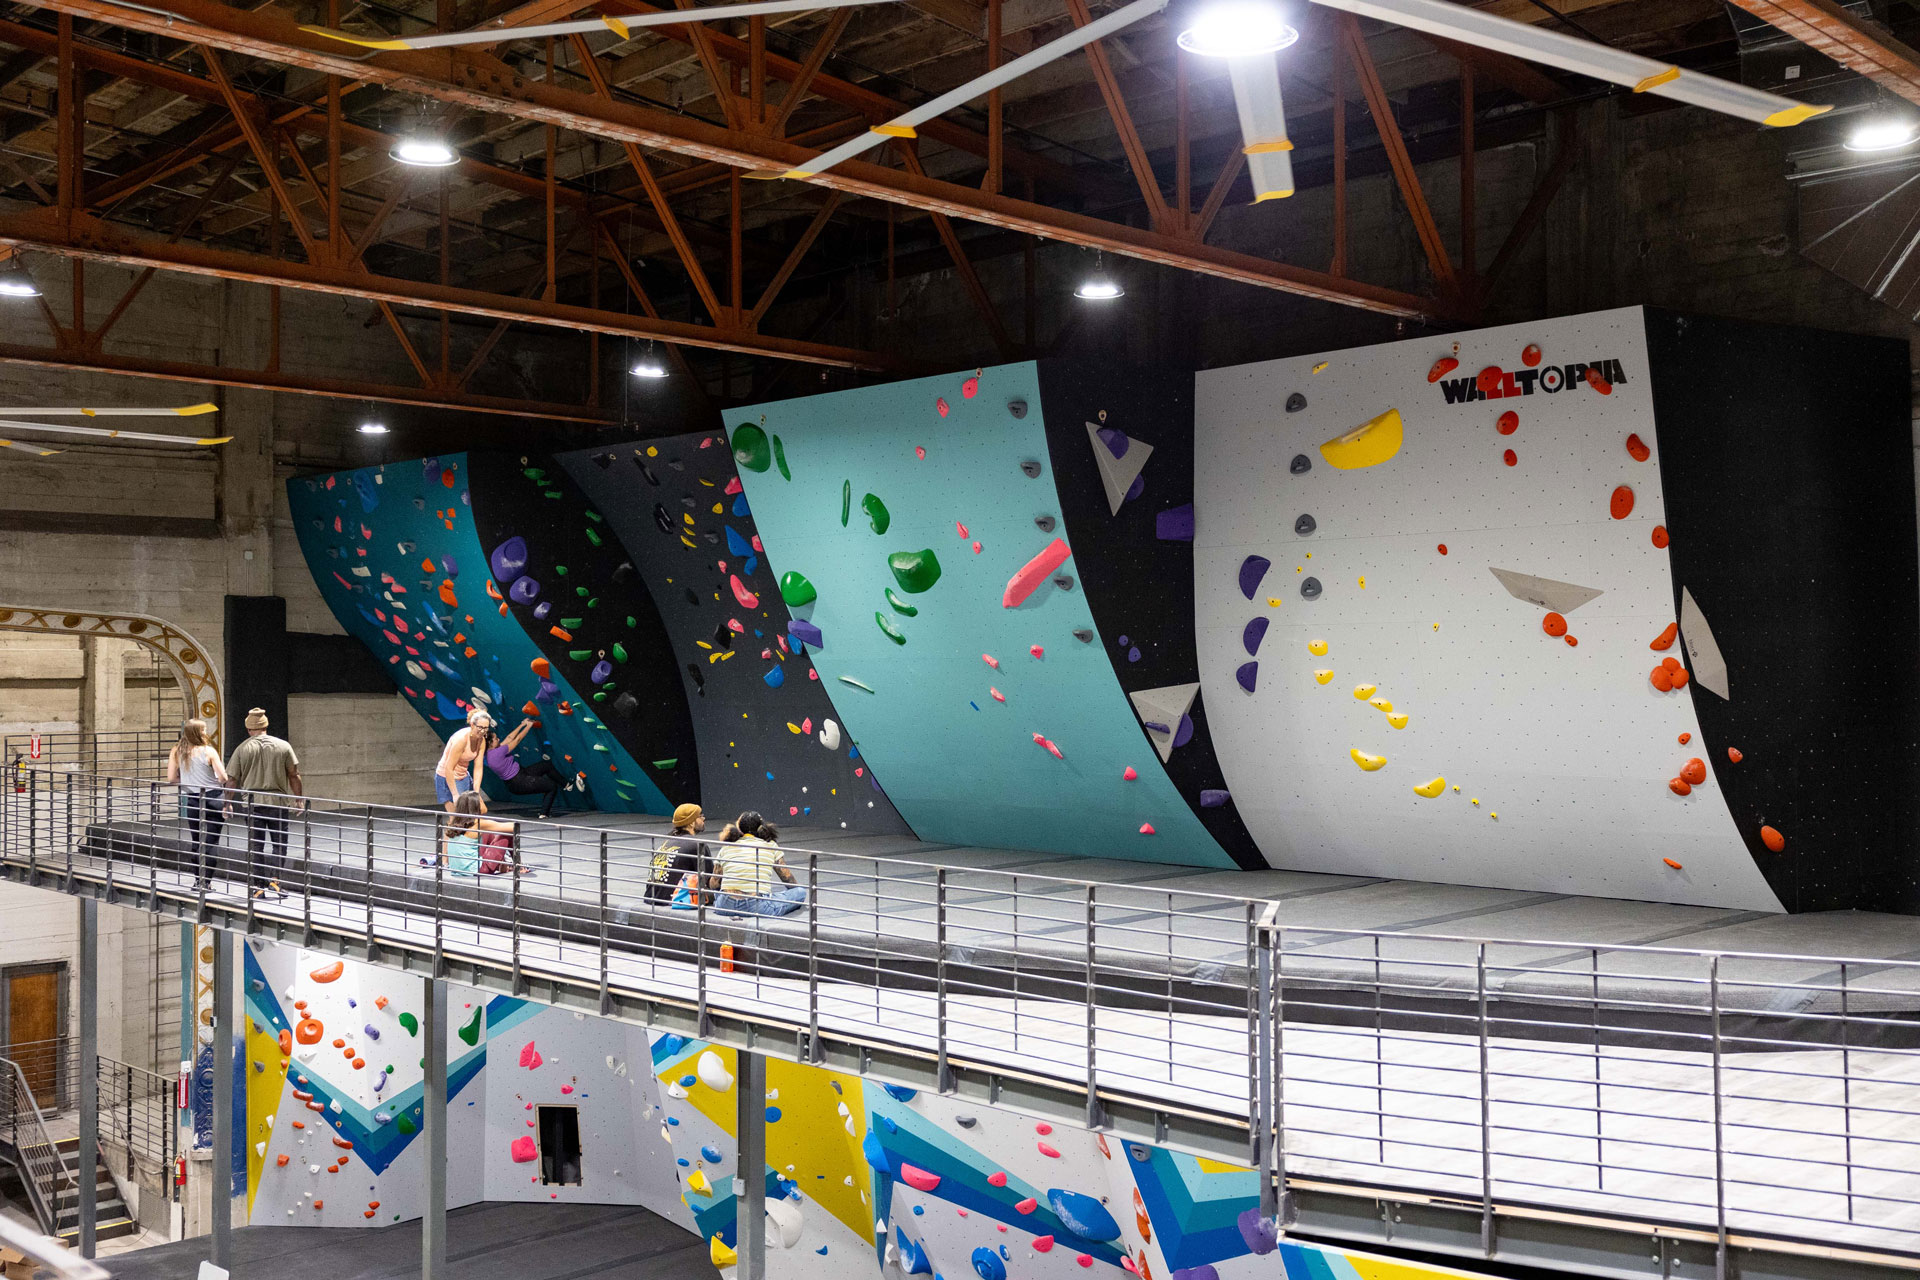 A sneak peek of the bouldering walls at The Oaks gym